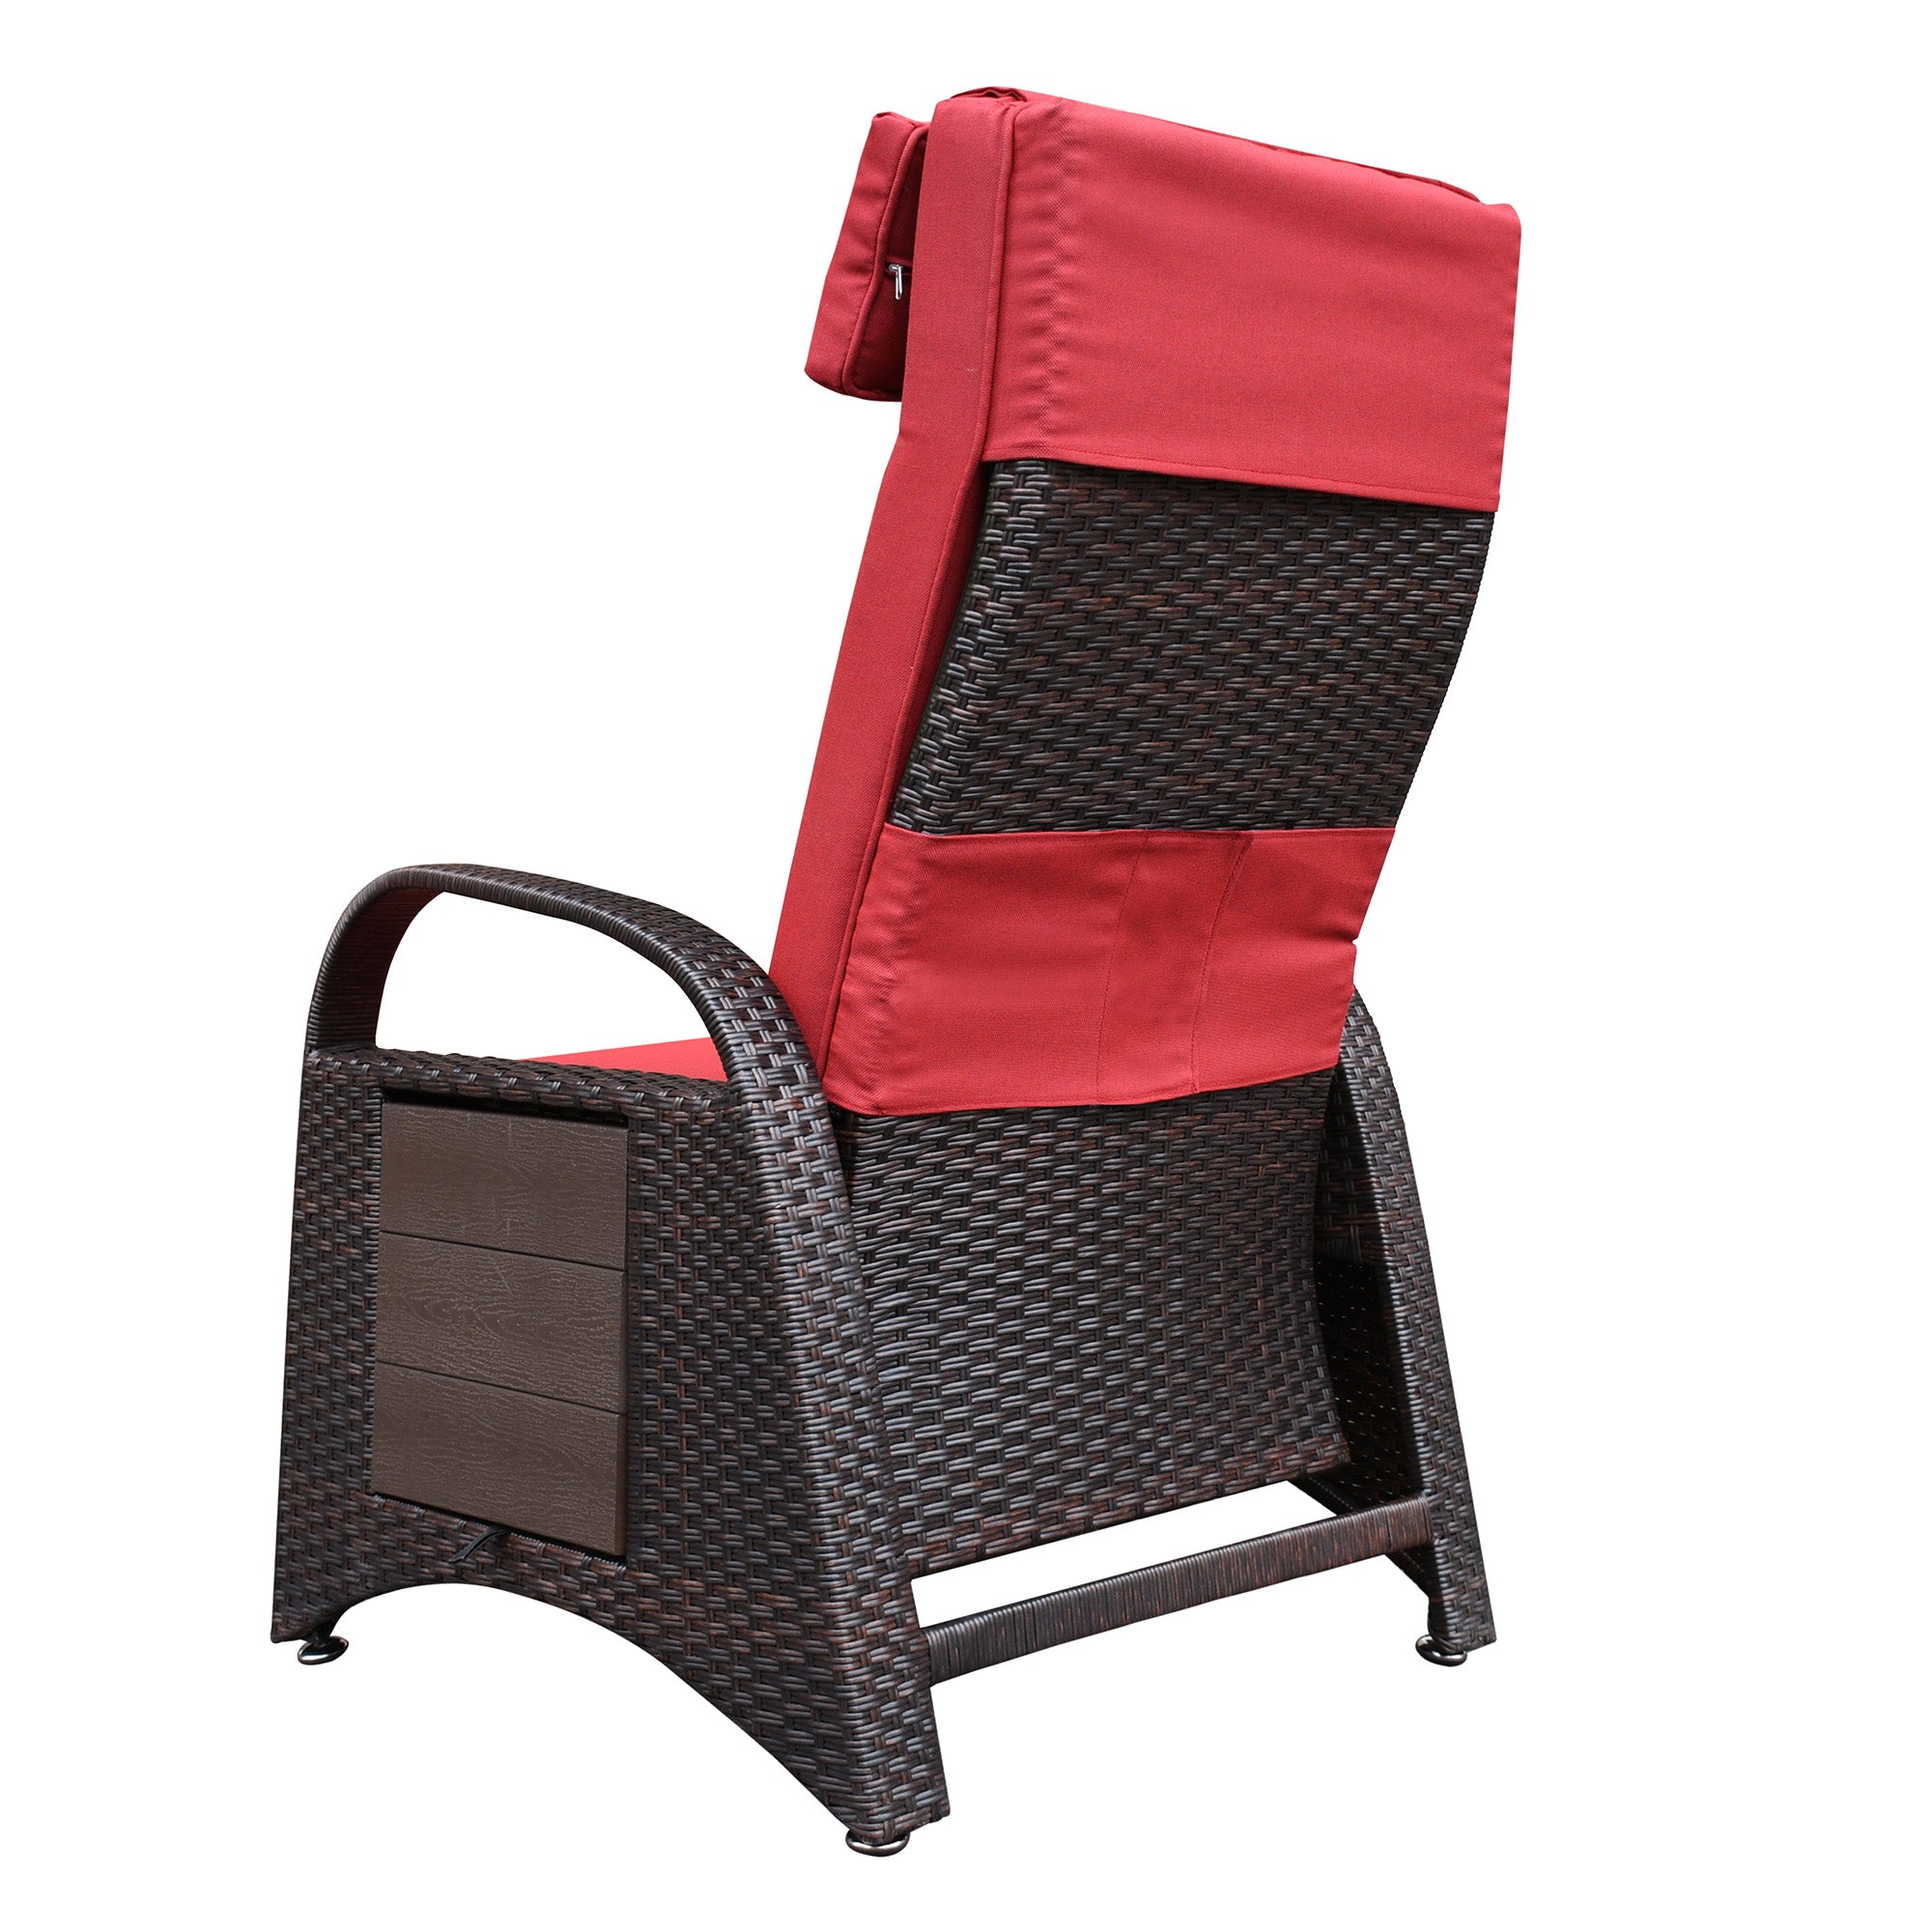 [KGORGE Plus] Outdoor Patio PE Wicker Adjustable Reclining Lounge Chair and Removable Soft Cushion with Modern Armchair and Ergonomic for Home, Sunbathing